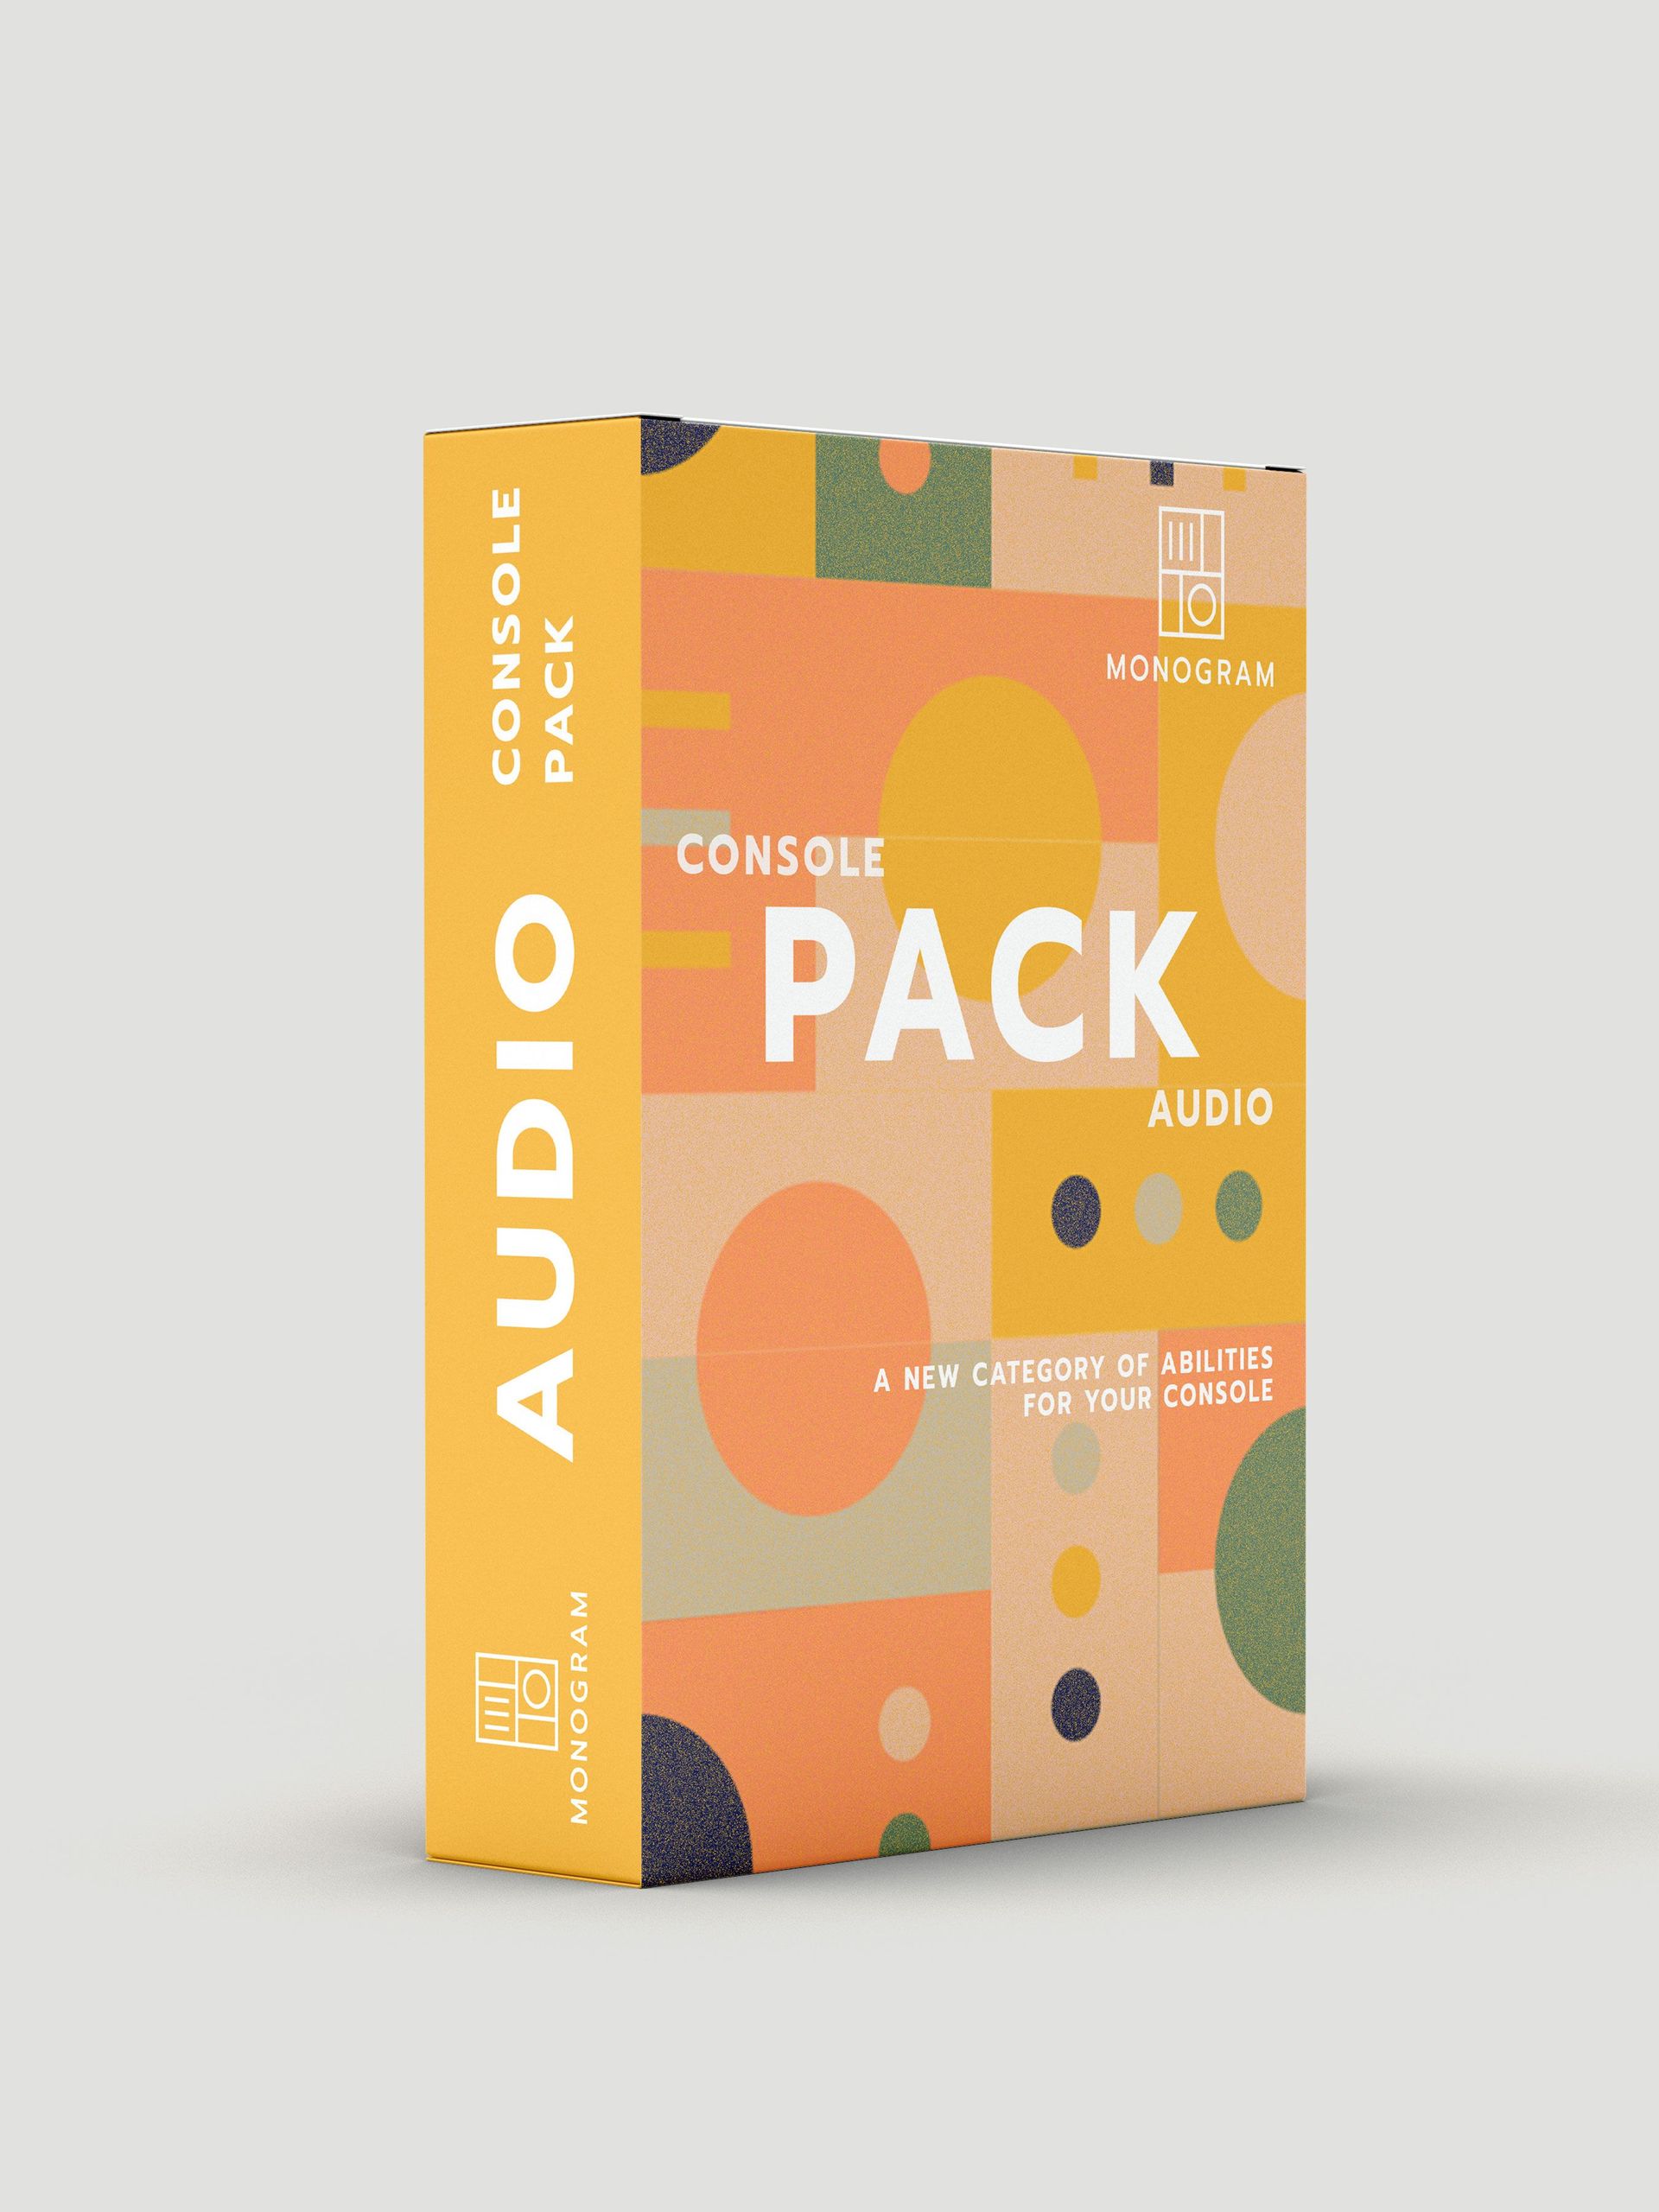 Audio Pack is included with Audio Console